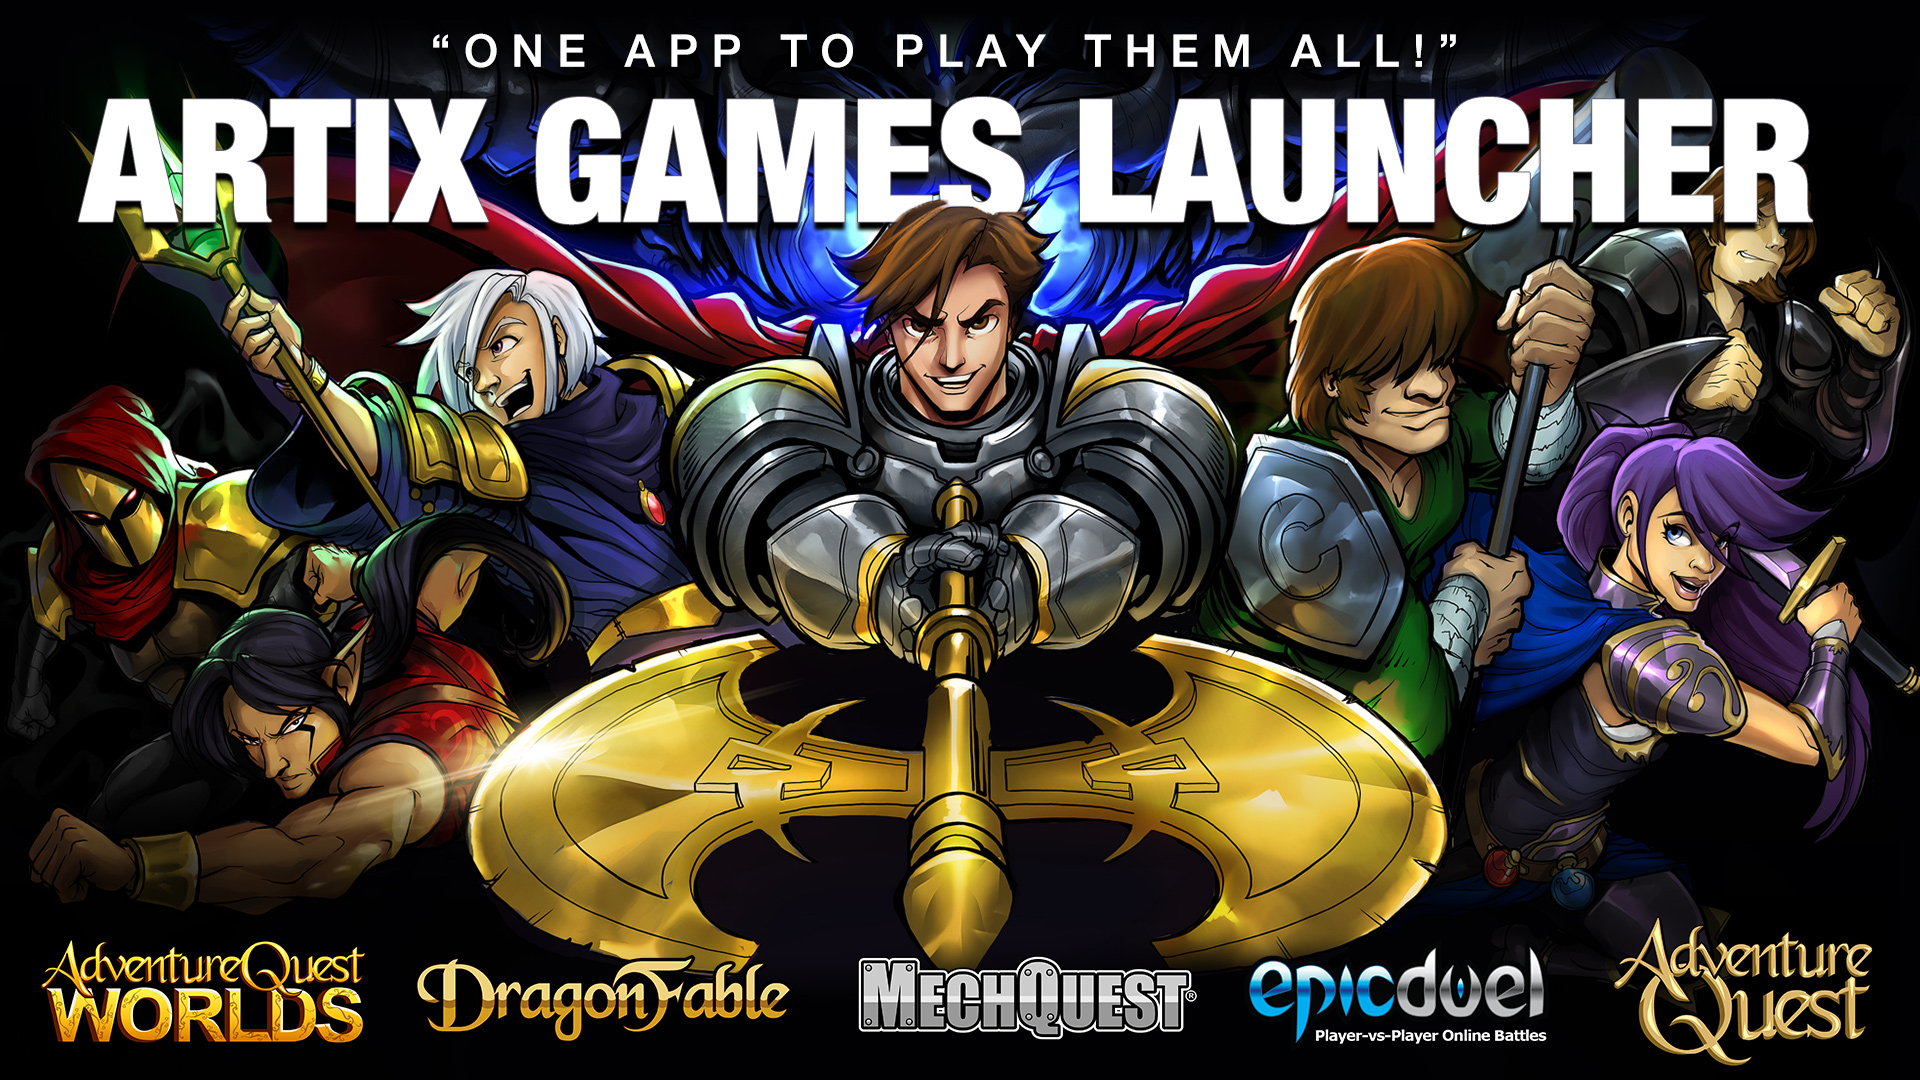 Download and play Artix Entertainment games